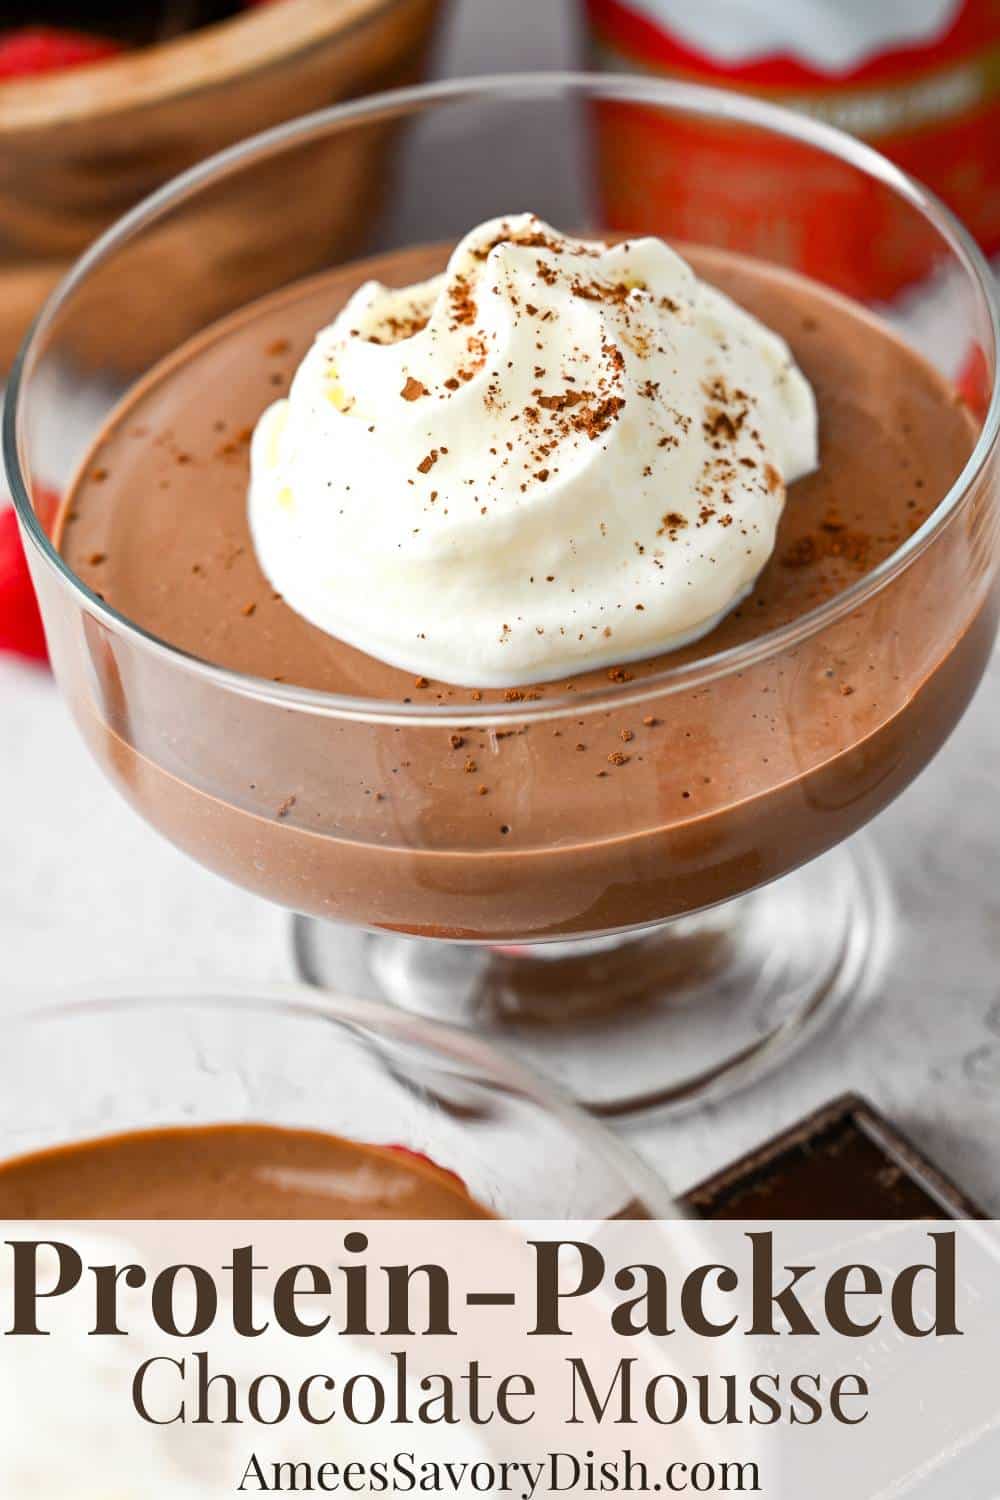 This delicious chocolate mousse not only satisfies your sweet tooth but also packs an impressive punch of protein! via @Ameessavorydish